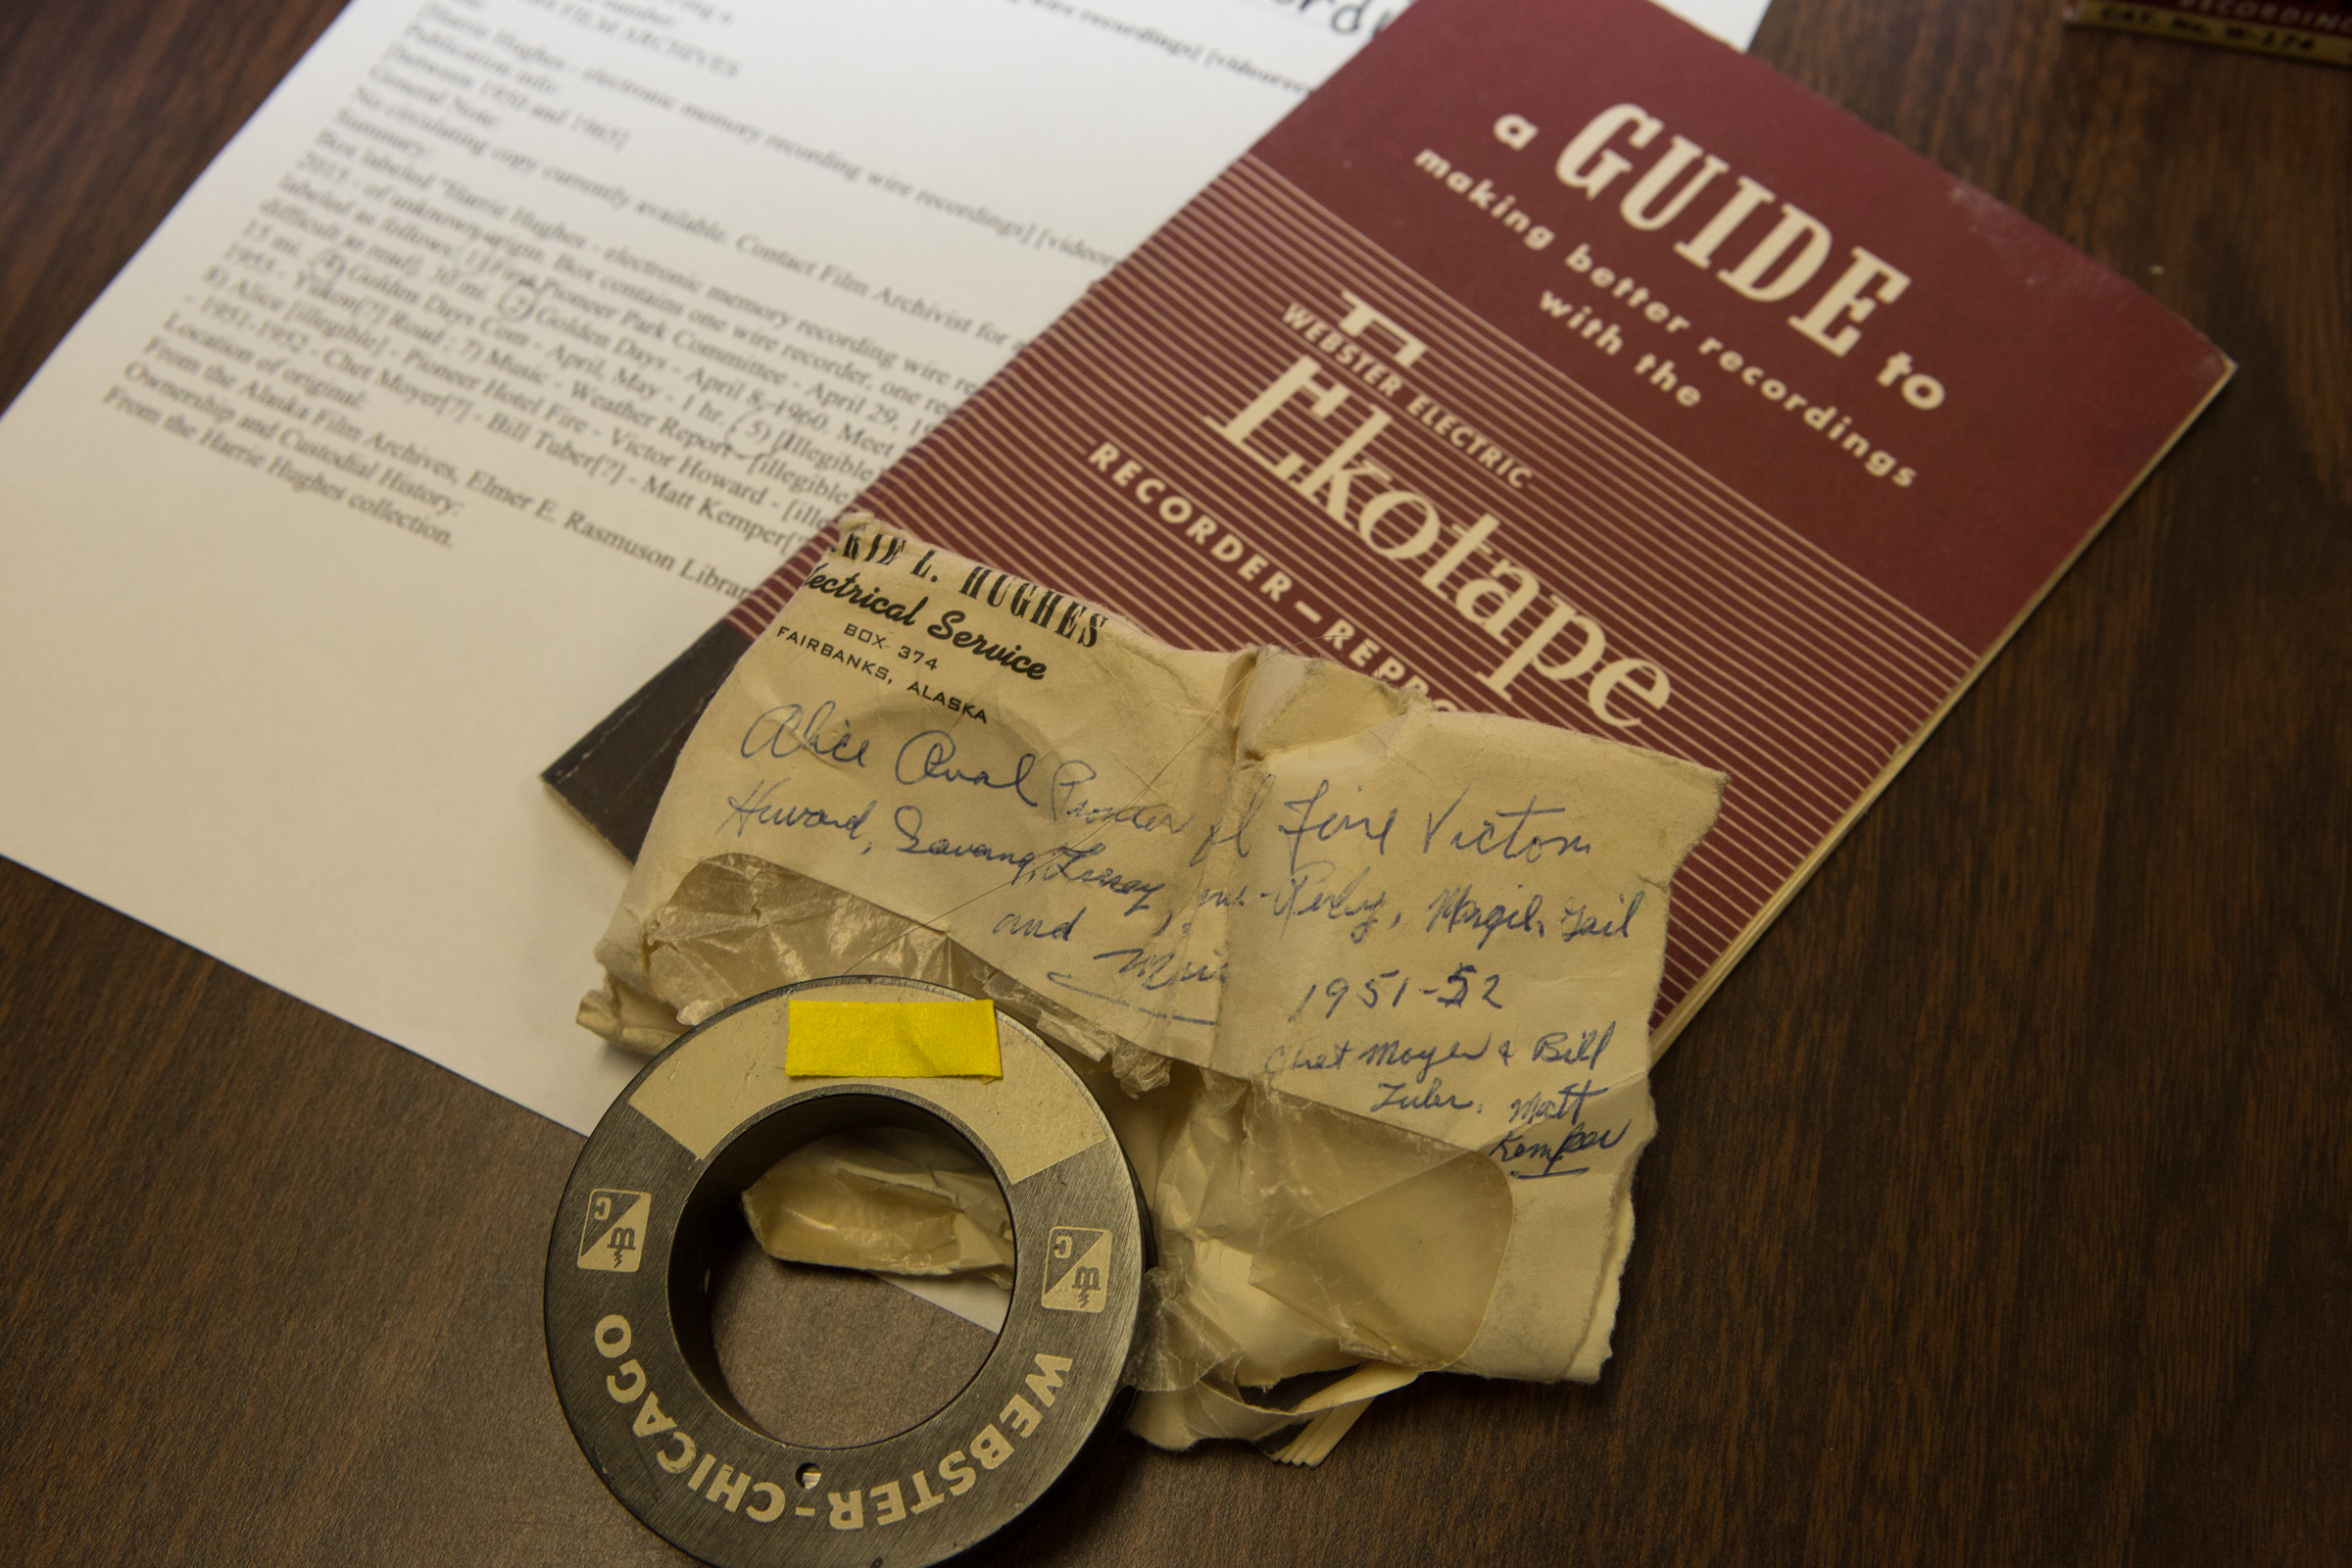 A handwritten note from the 1950s accompanies a recording device and several recording wires that were recently donated to the Oral History program at UAF's Rasmuson Library. The recorder used technology popular through the country in the 1930s-1960s. | UAF Photo by Todd Paris